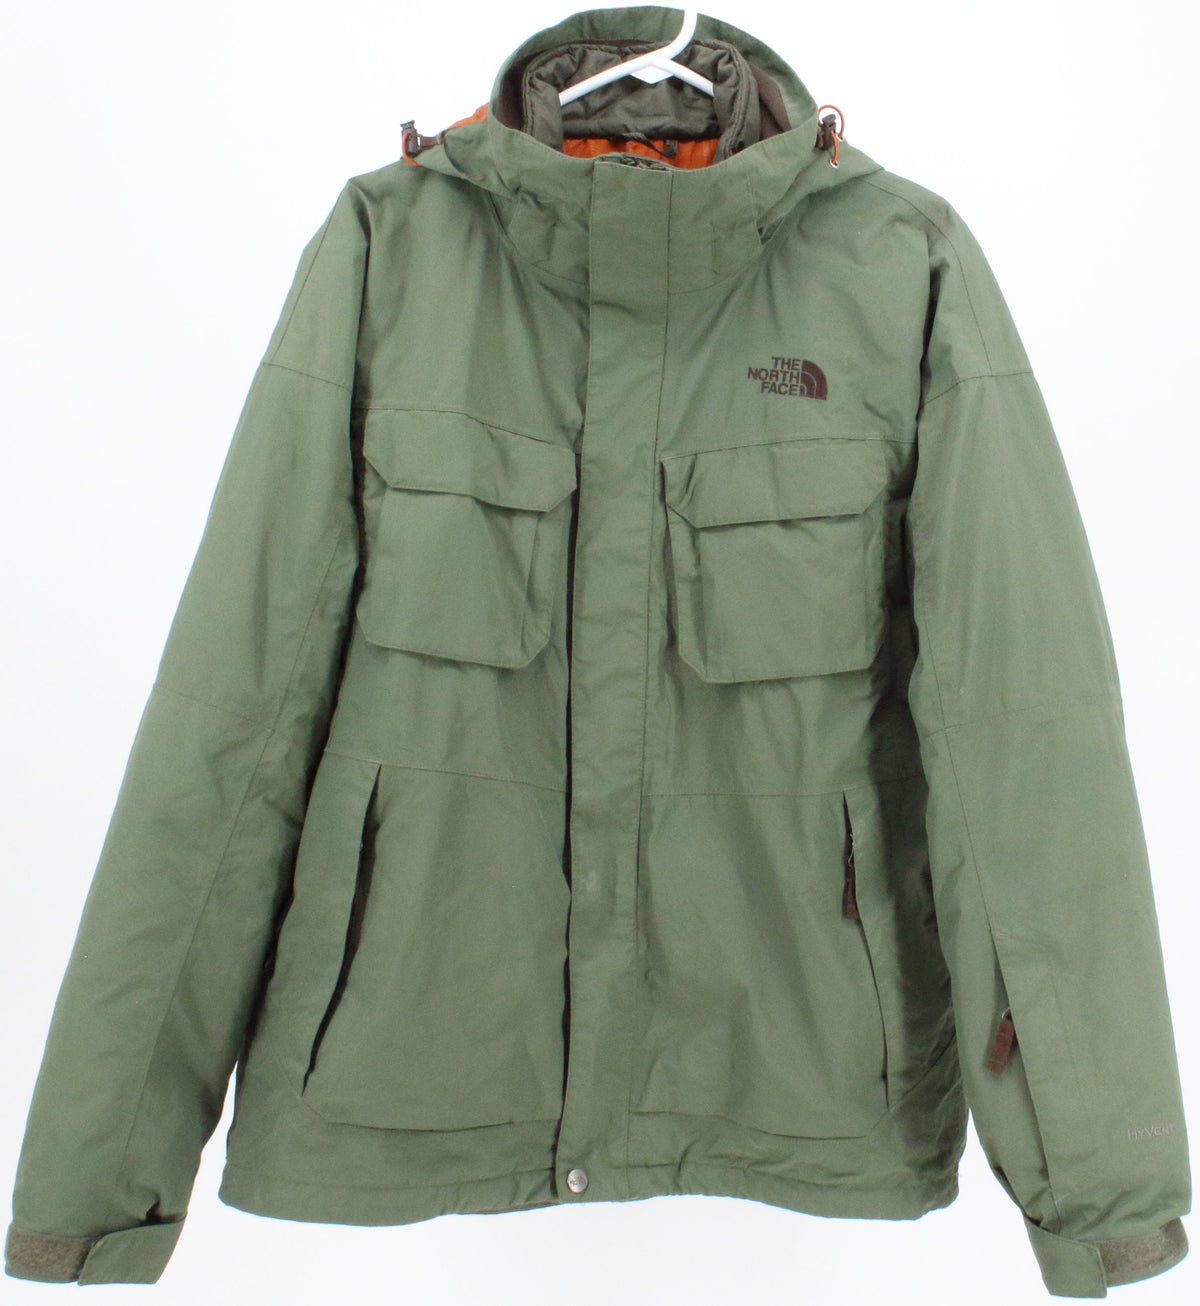 The North Face Men's Green and Orange Insulated Coat